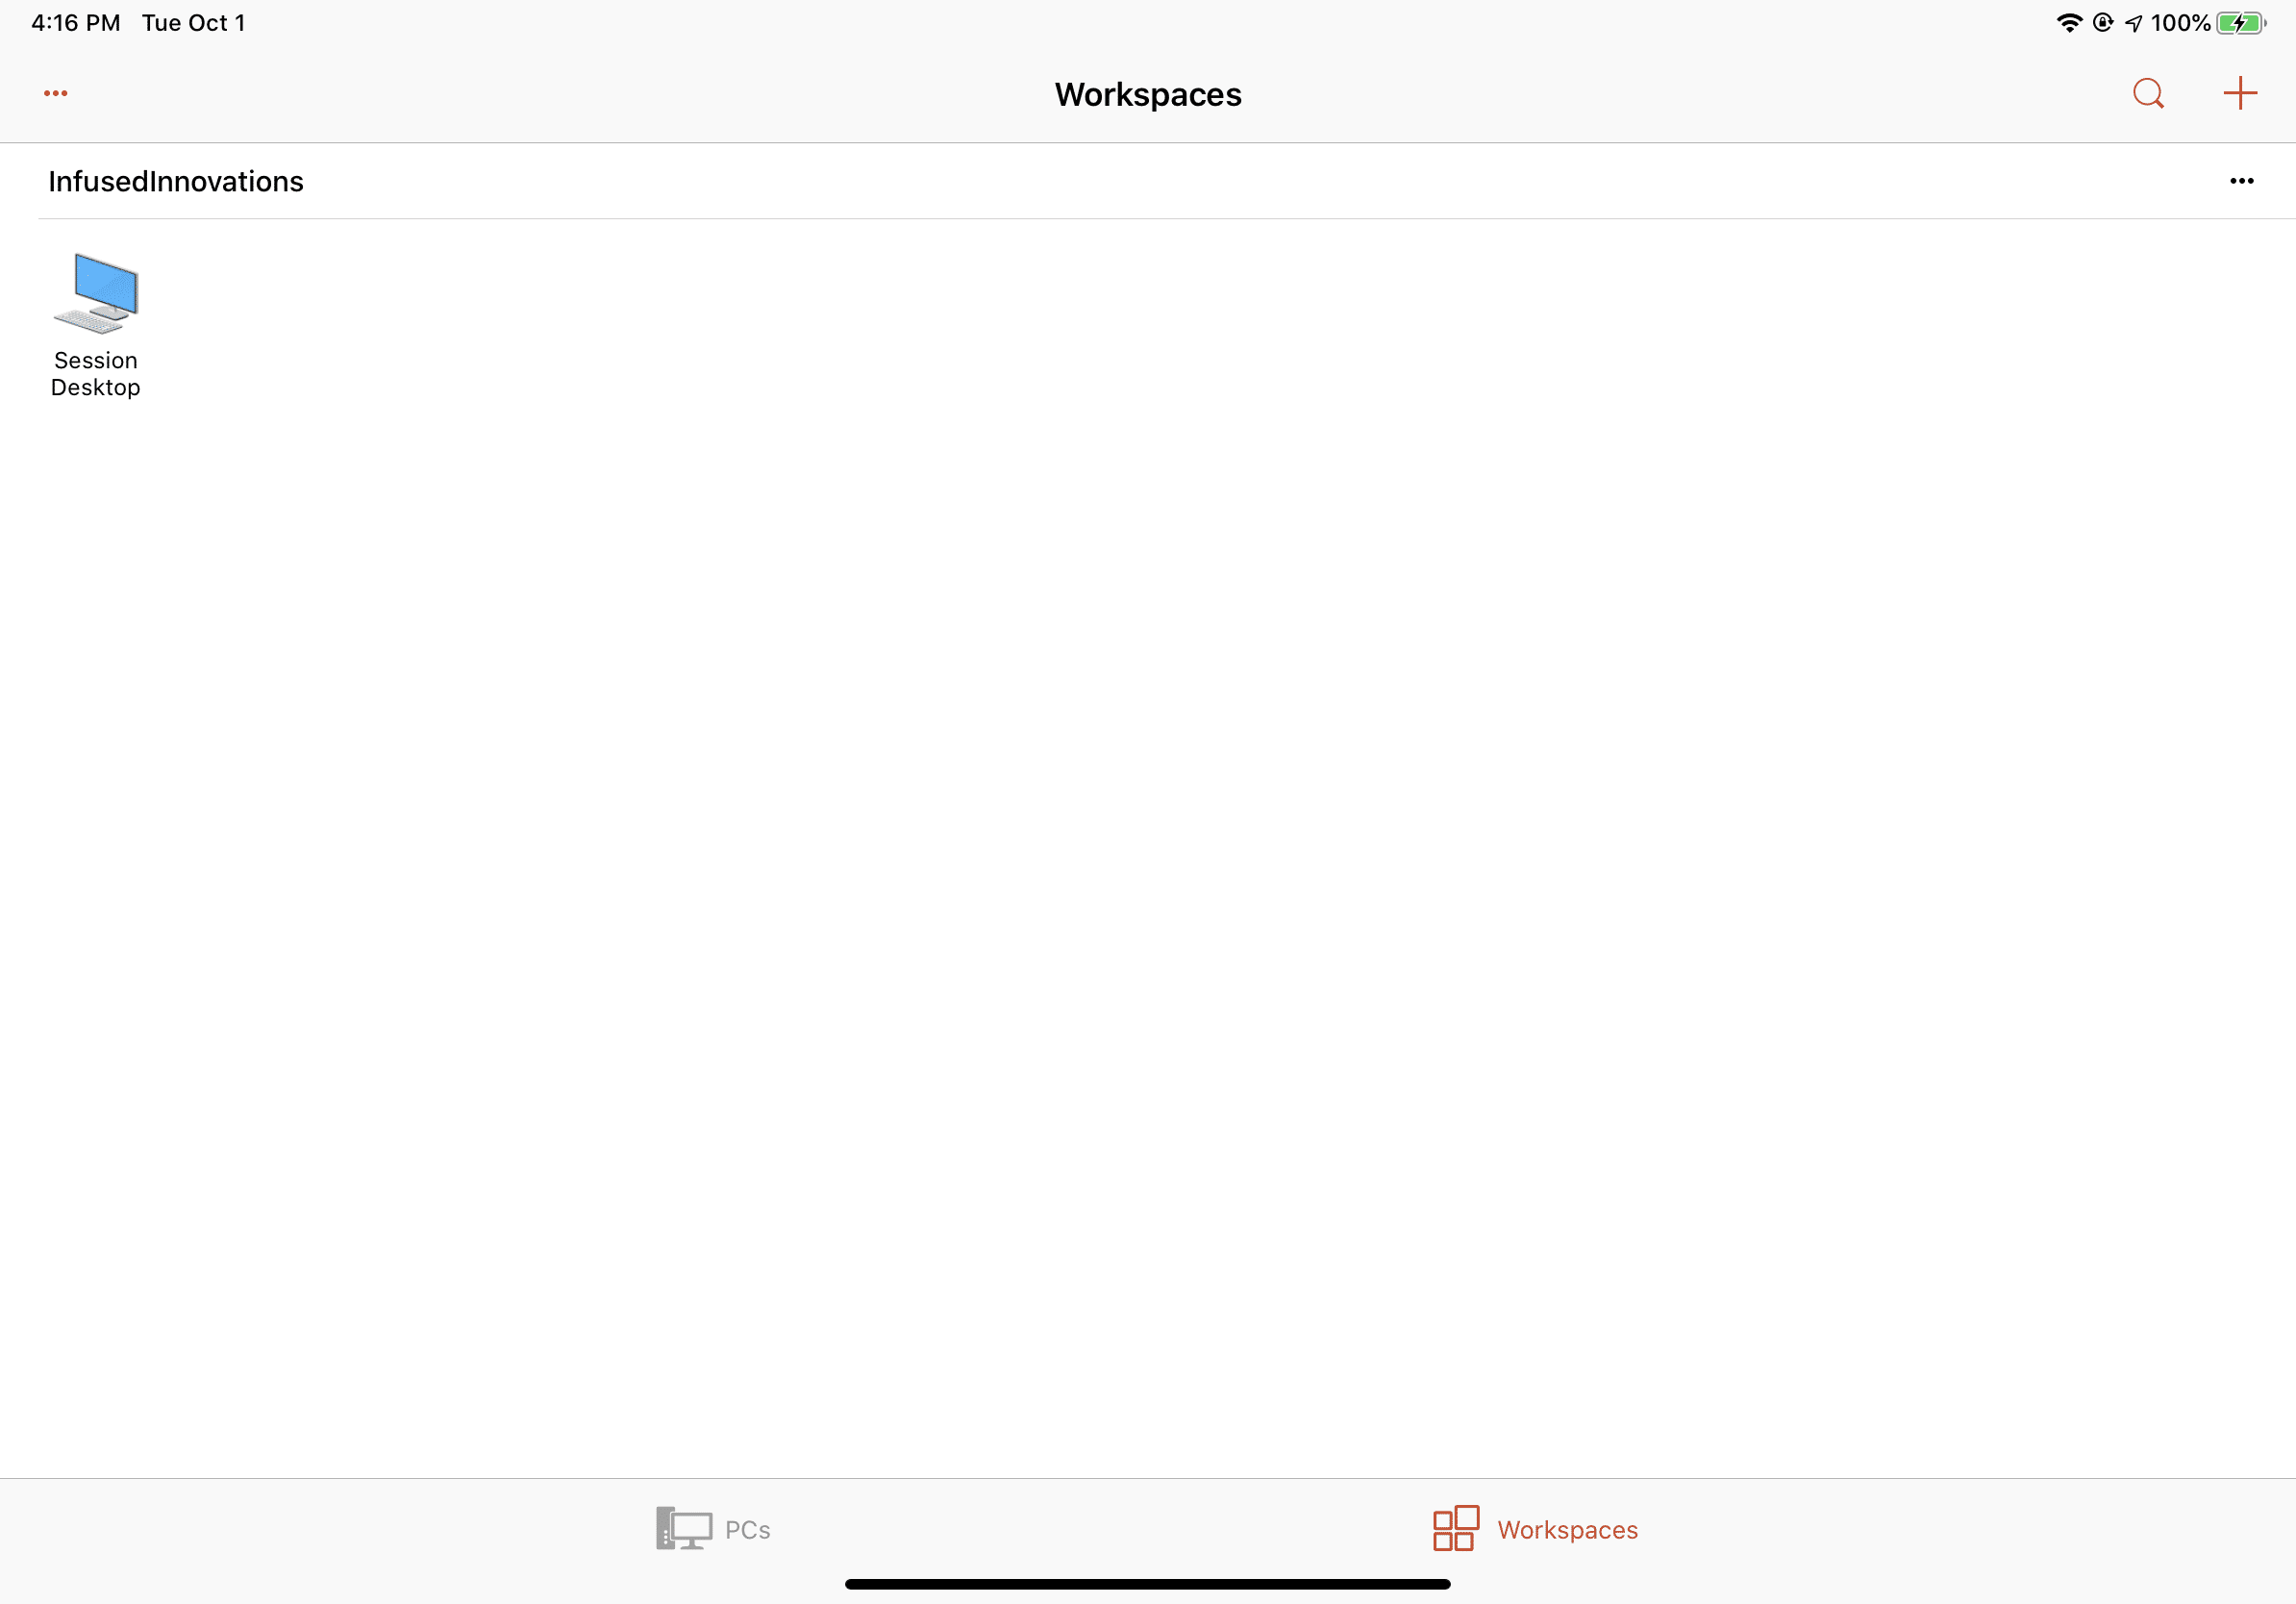 Screenshot of iPadOS showing a session host.